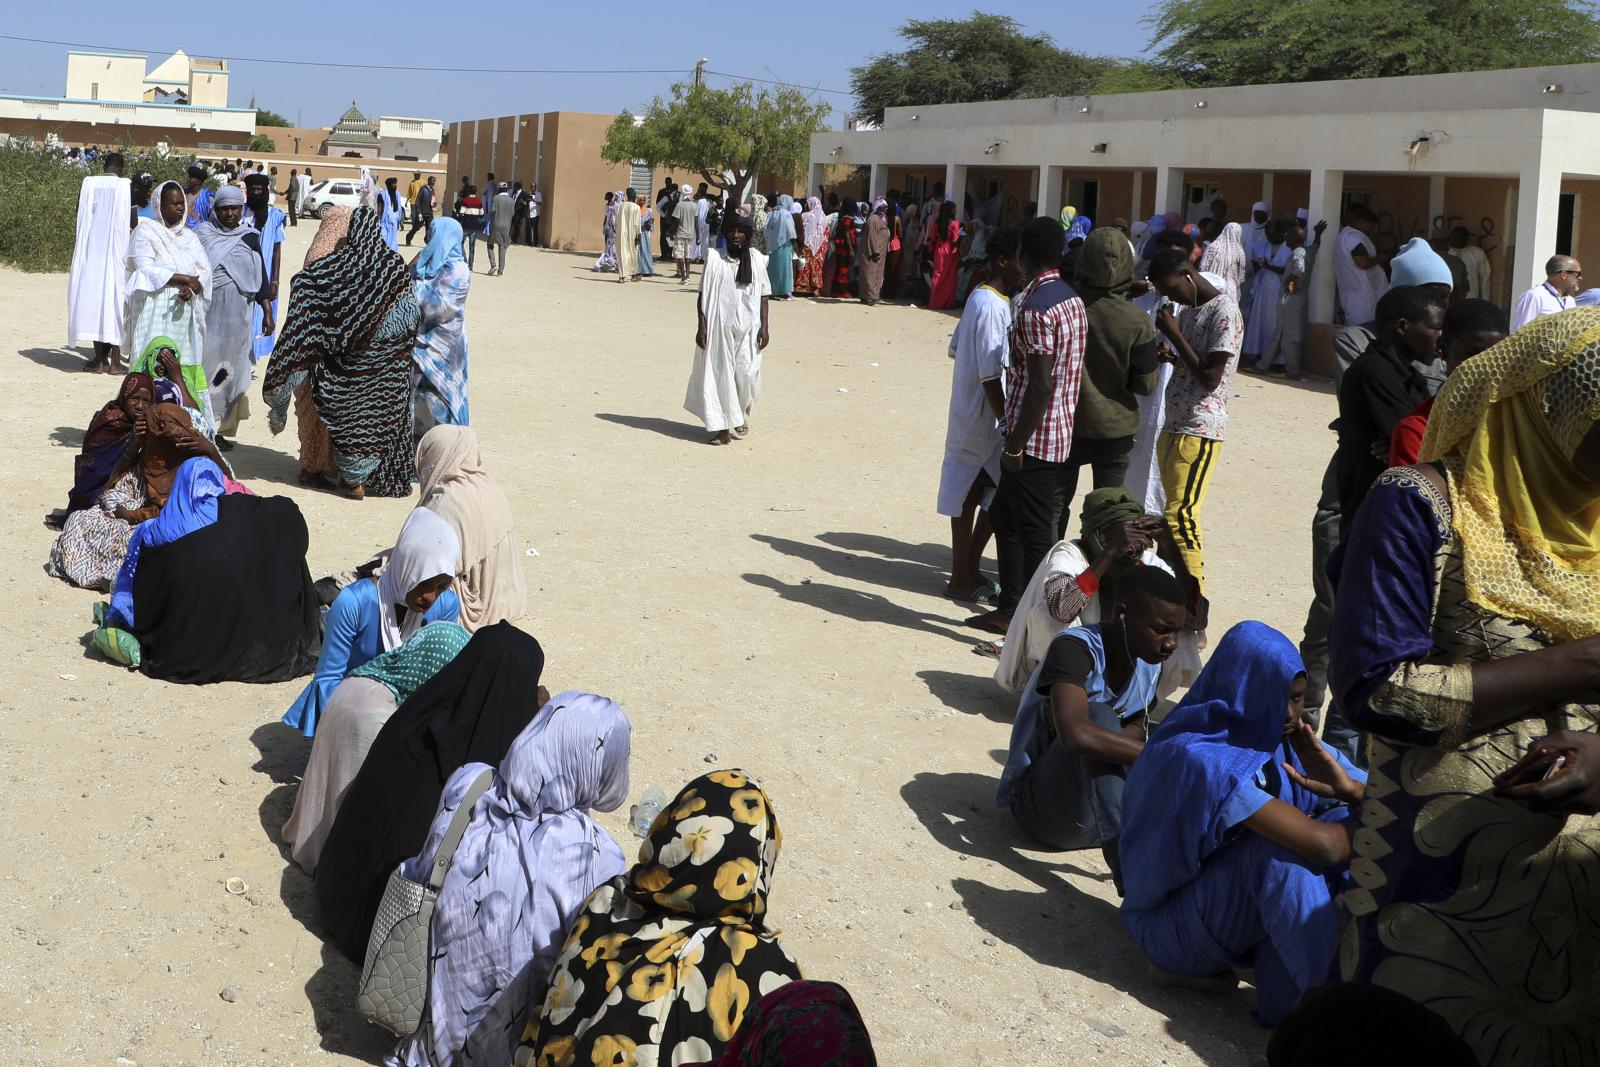 People line up to cast their ballot in Mauritania's 2019 presidential elections in Nouakchott, Mauritania.